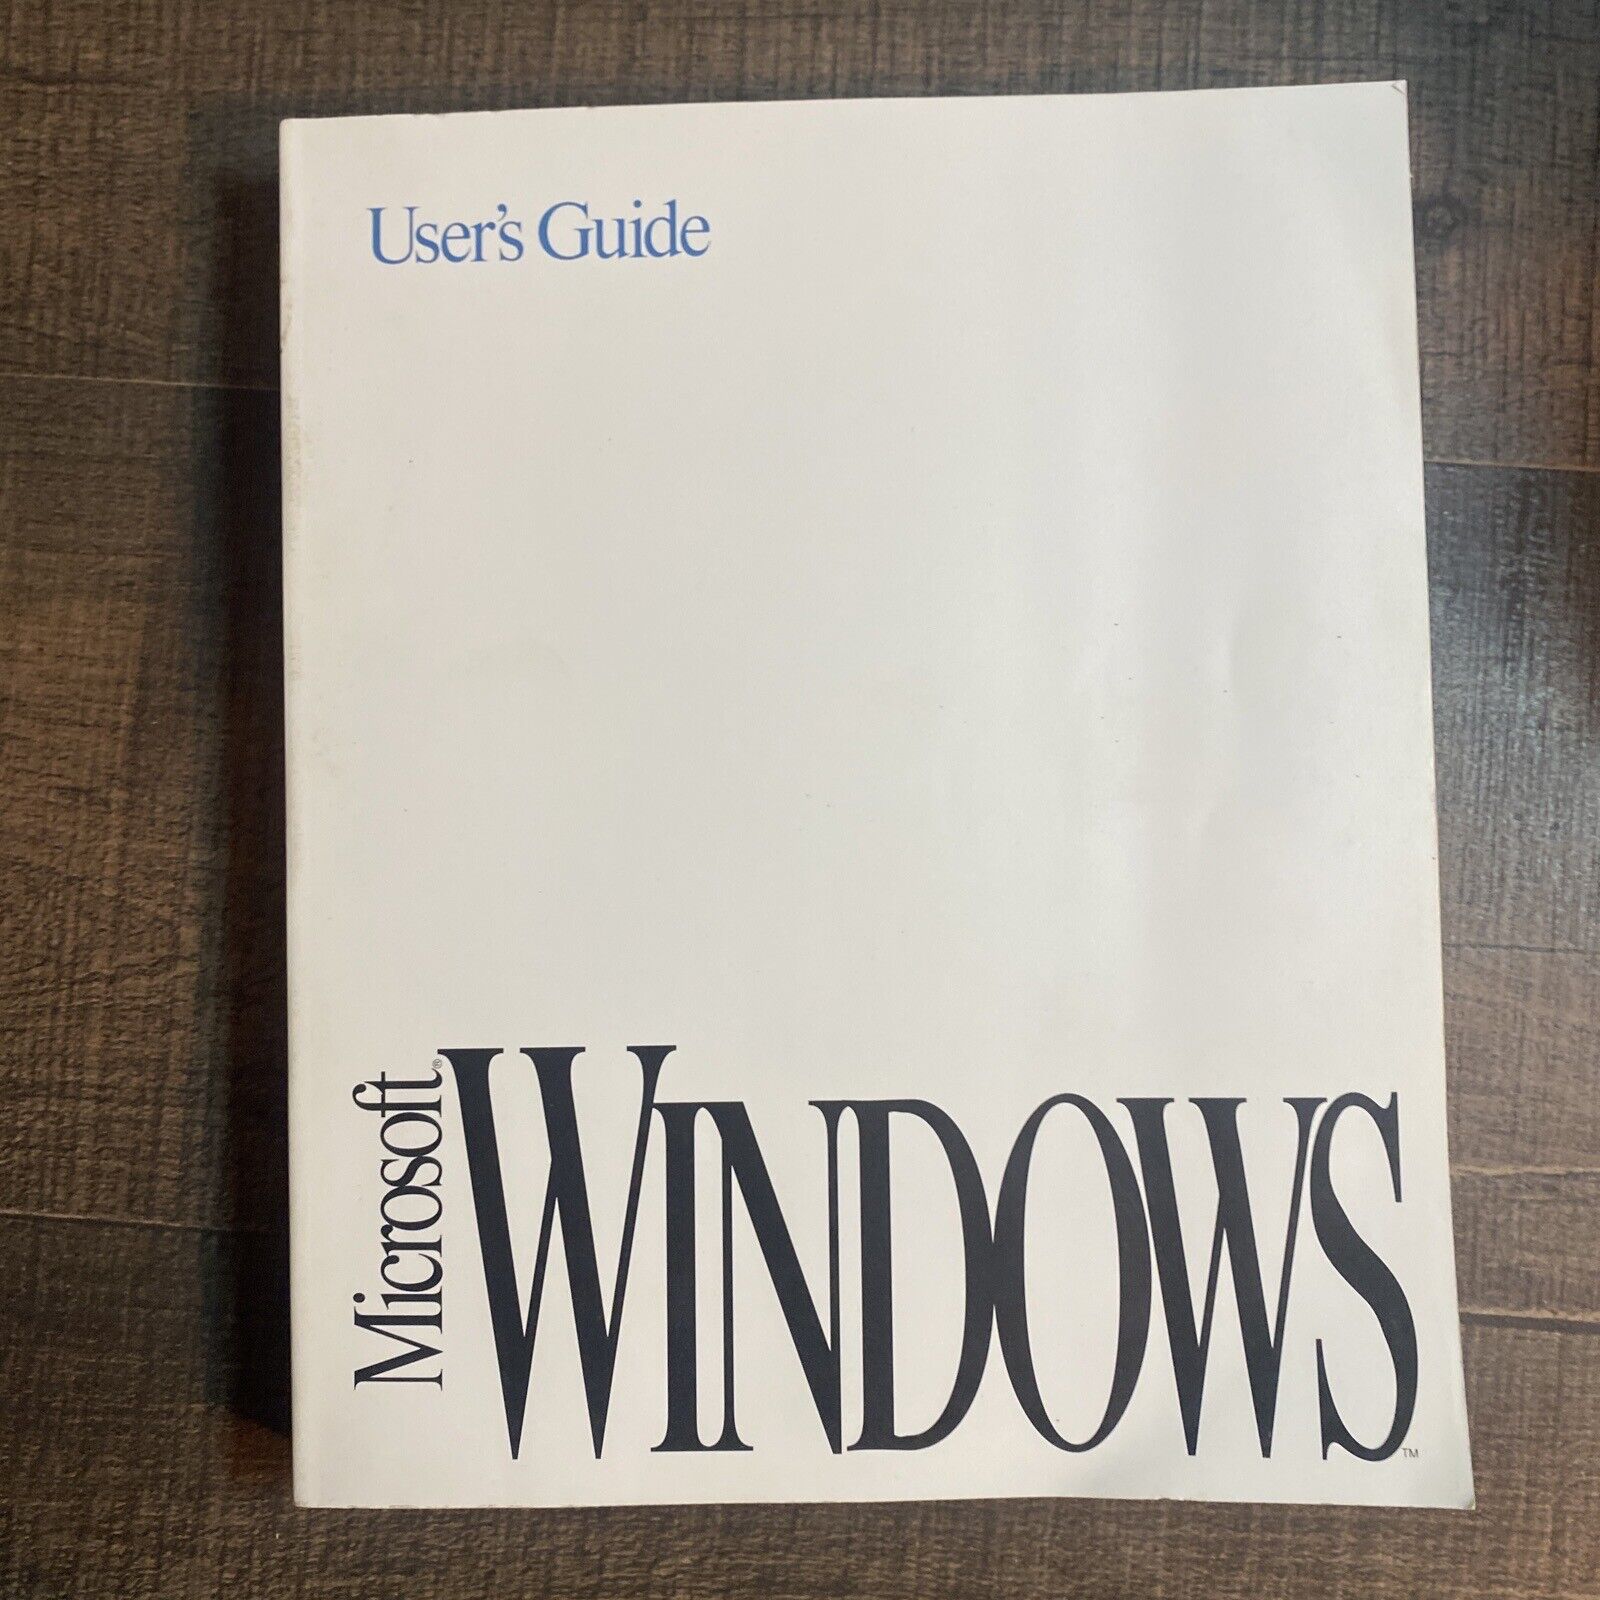 Microsoft Windows User Guide Version 3.1 Softcover Vintage 90’s Reference Book